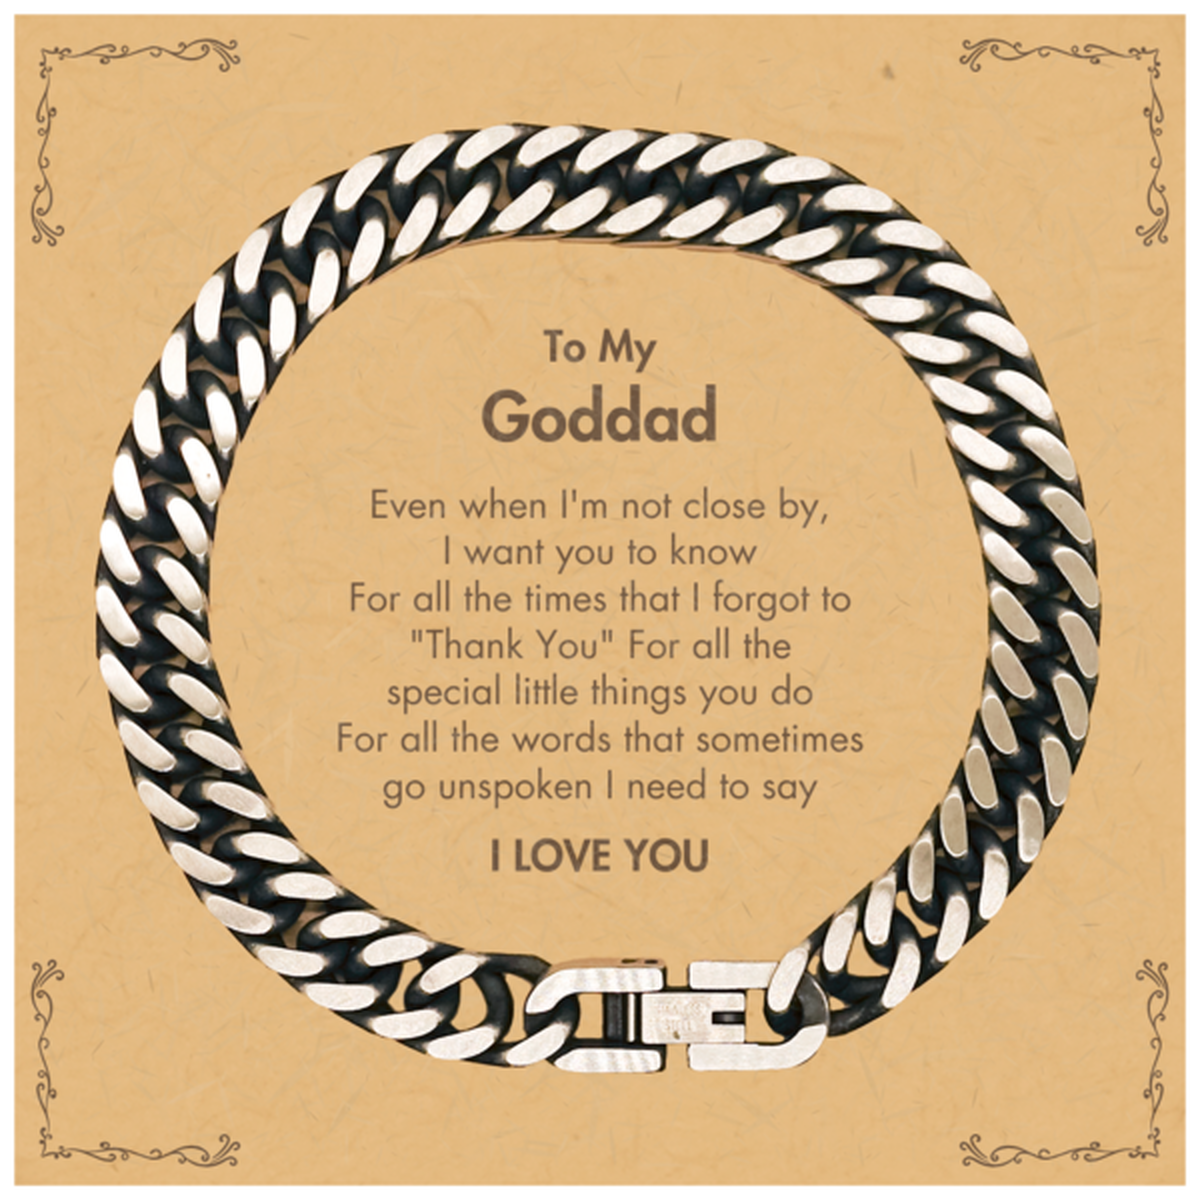 Thank You Gifts for Goddad, Keepsake Cuban Link Chain Bracelet Gifts for Goddad Birthday Mother's day Father's Day Goddad For all the words That sometimes go unspoken I need to say I LOVE YOU